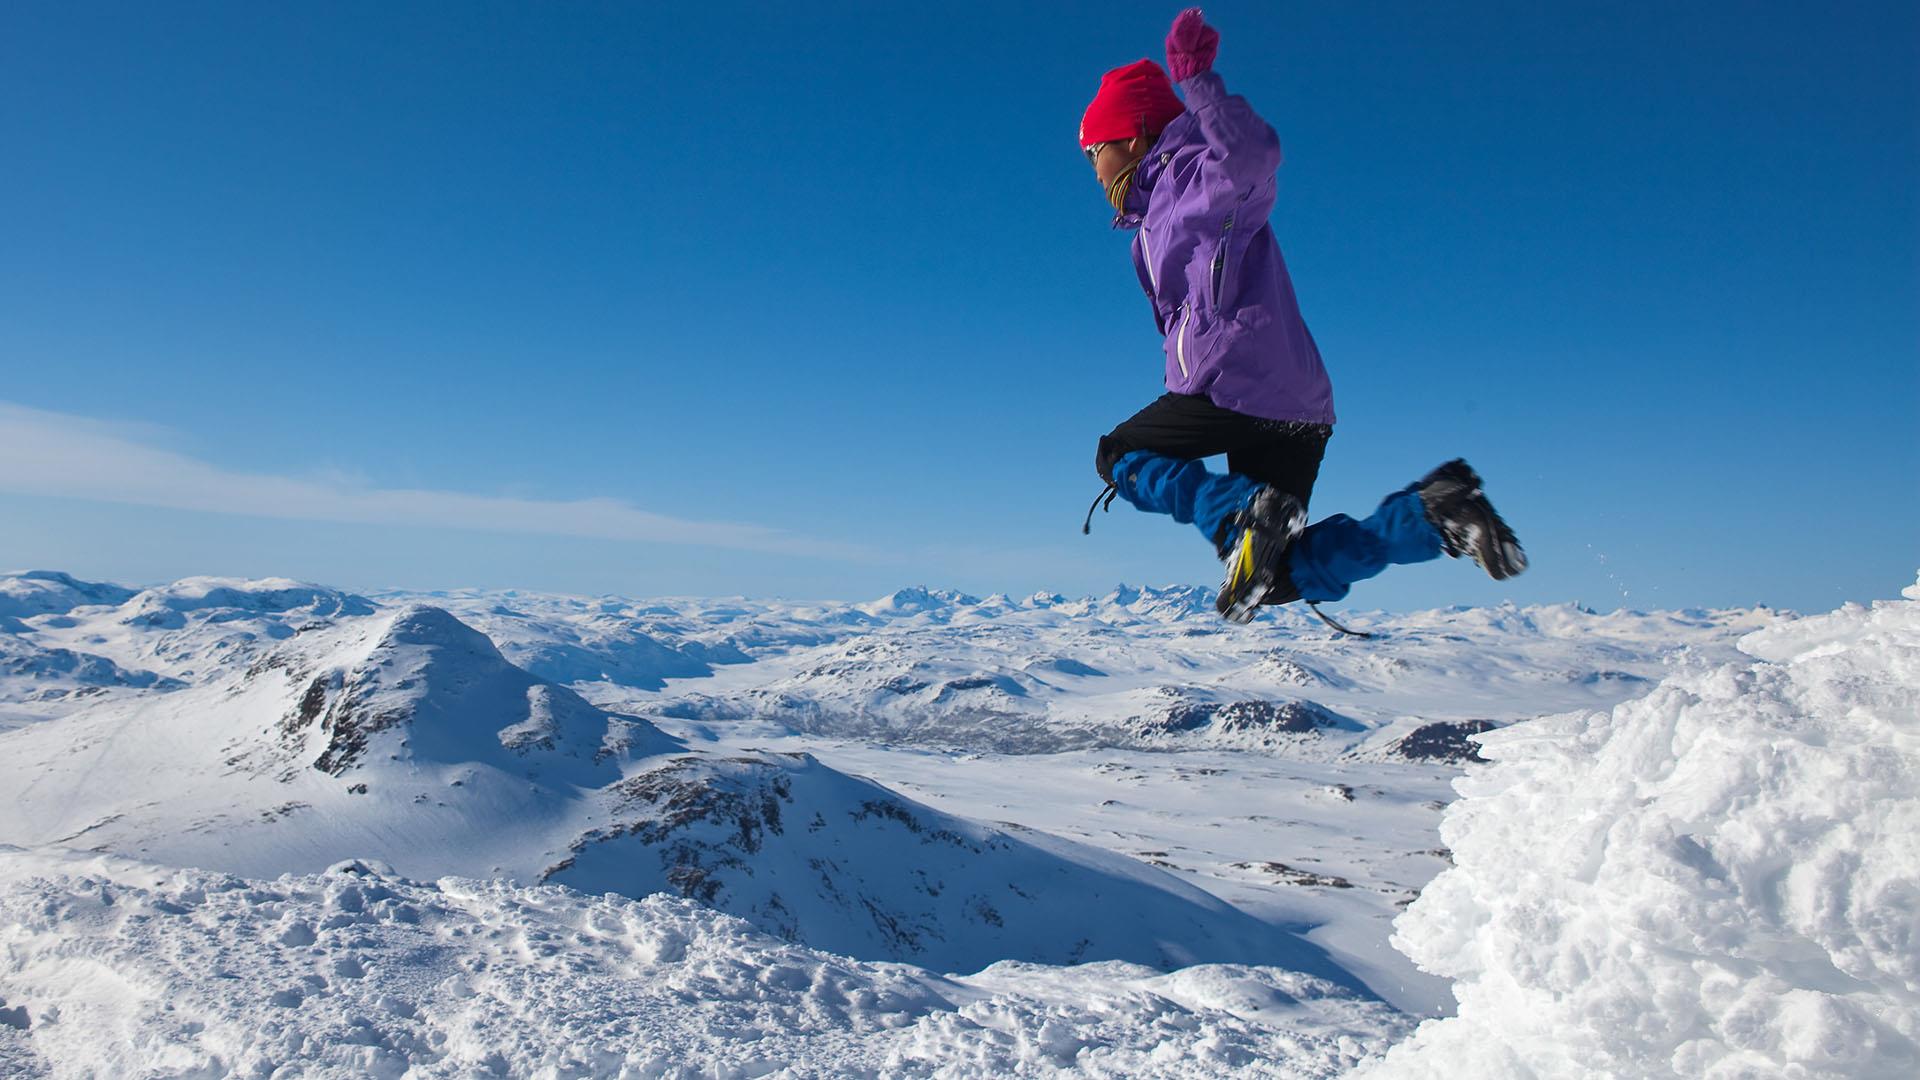 A girl in skiing outfit at the summit of a mountain jumps high in the air. Under her feet lies a rugged mountain landscape covered in snow as far as the eye can see. Blue cloudfree sky.